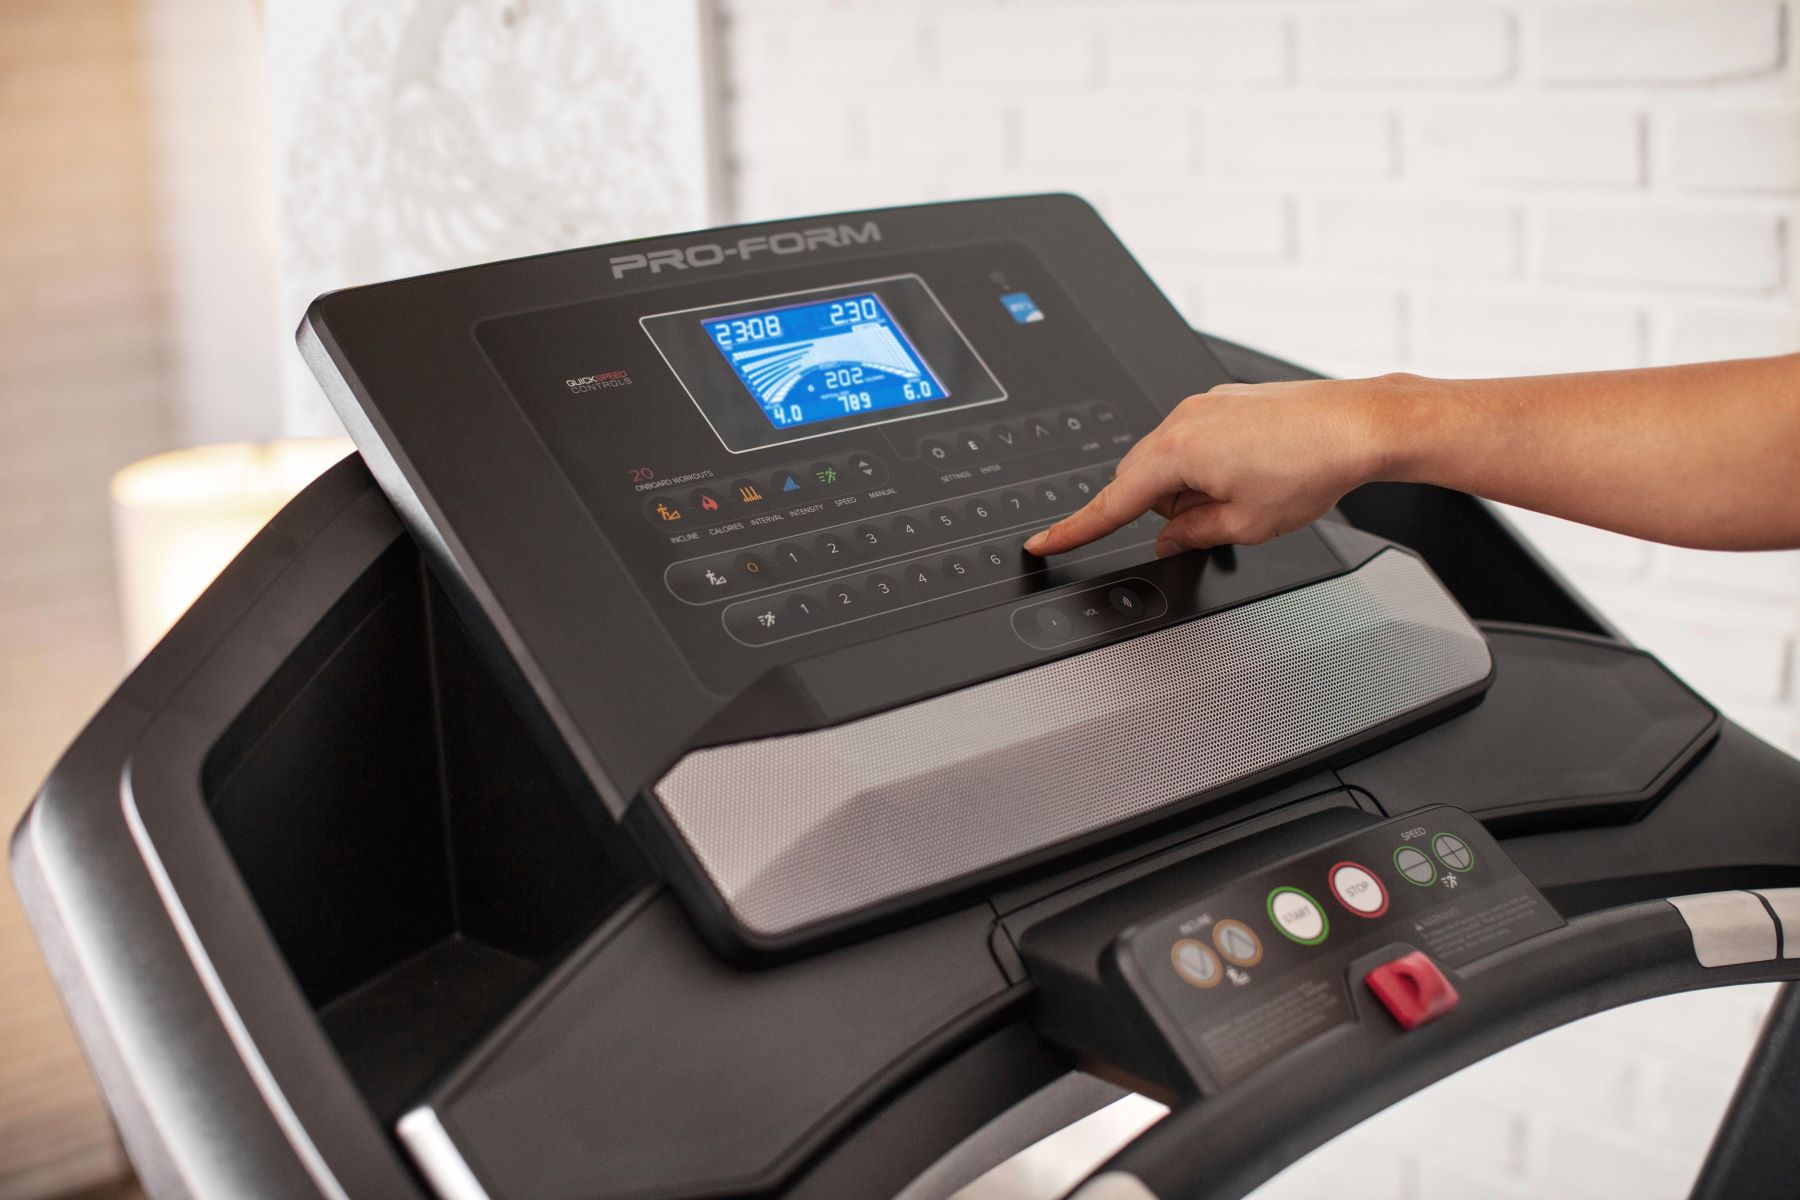 How To Turn Off Screen On ProForm Treadmill